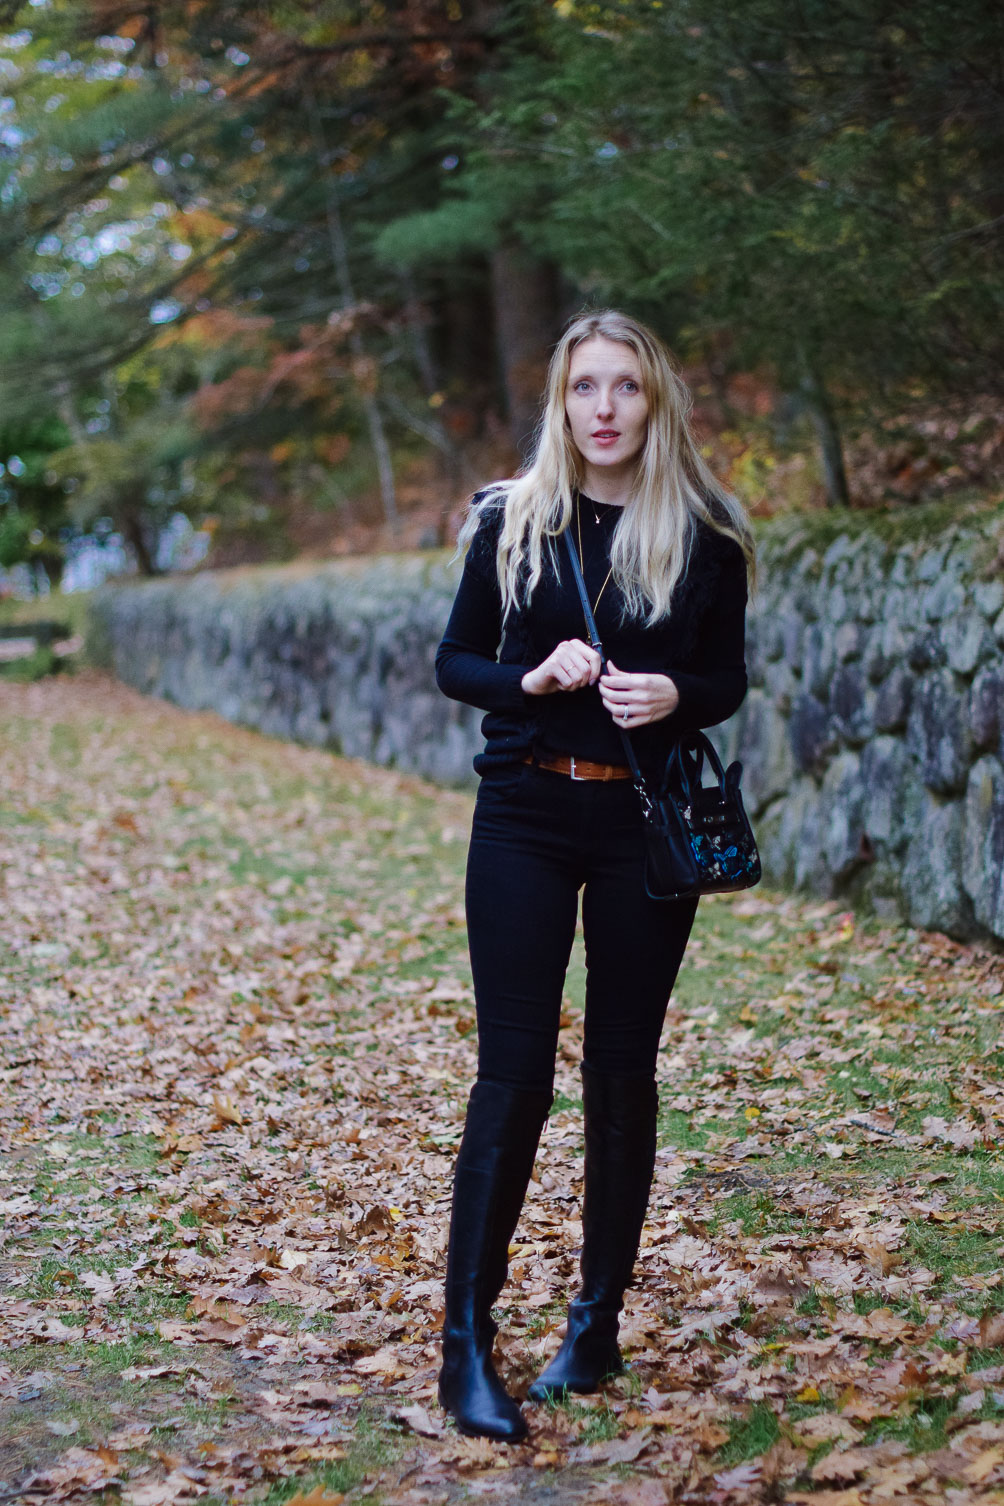 styling black leather riding boots with a monochrome look for fall winter outfit inspiration